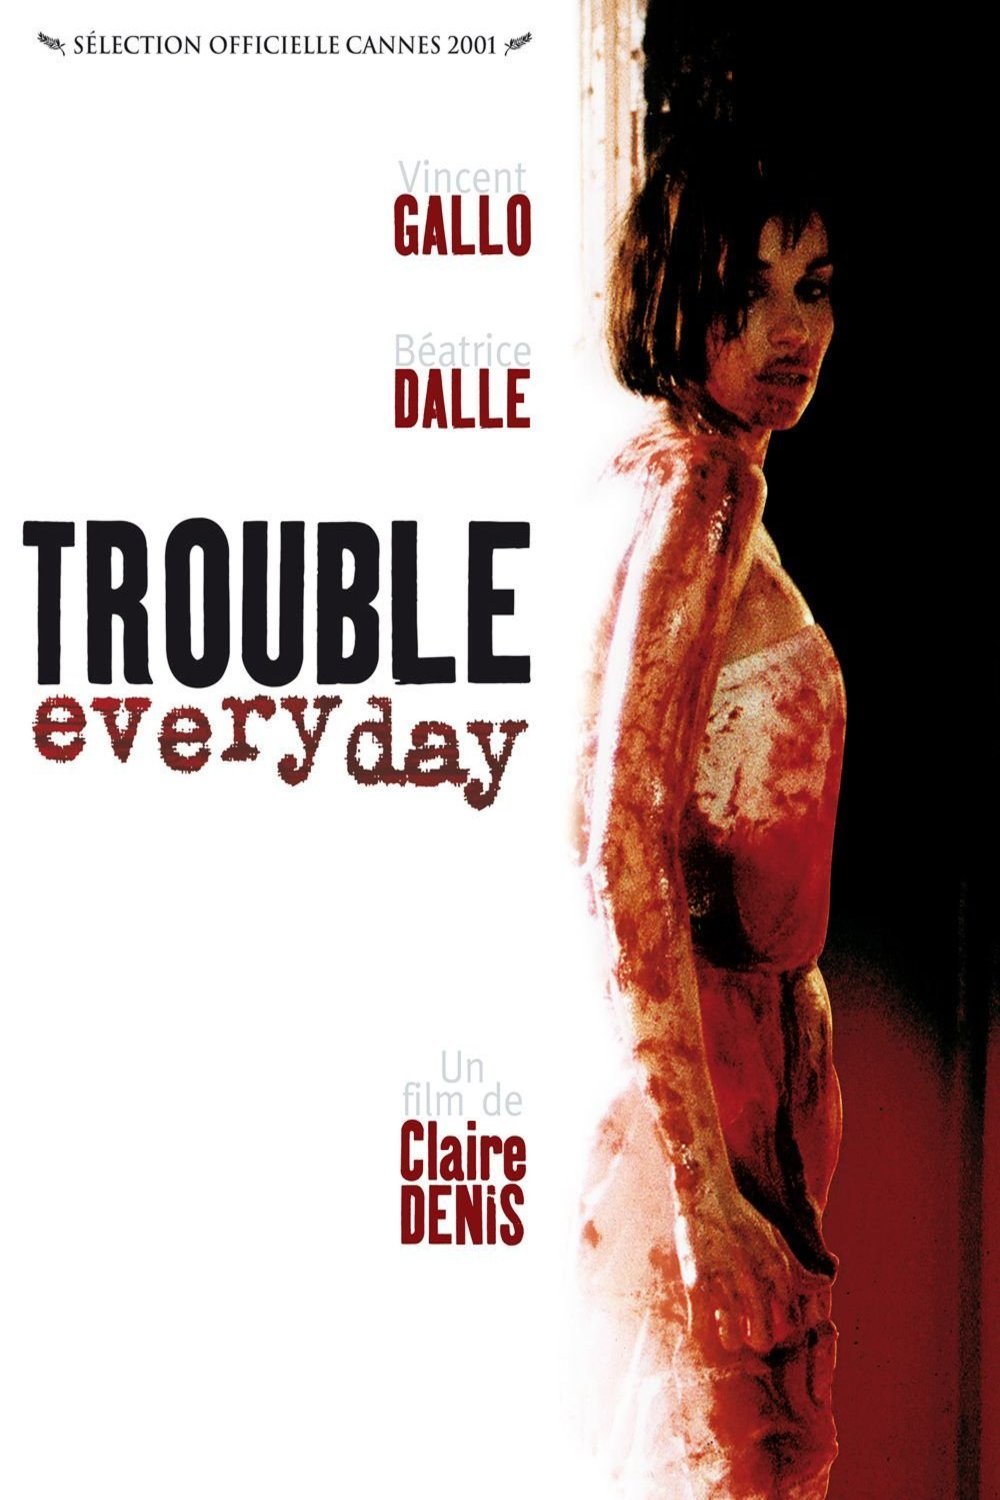 Poster of the movie Trouble Every Day